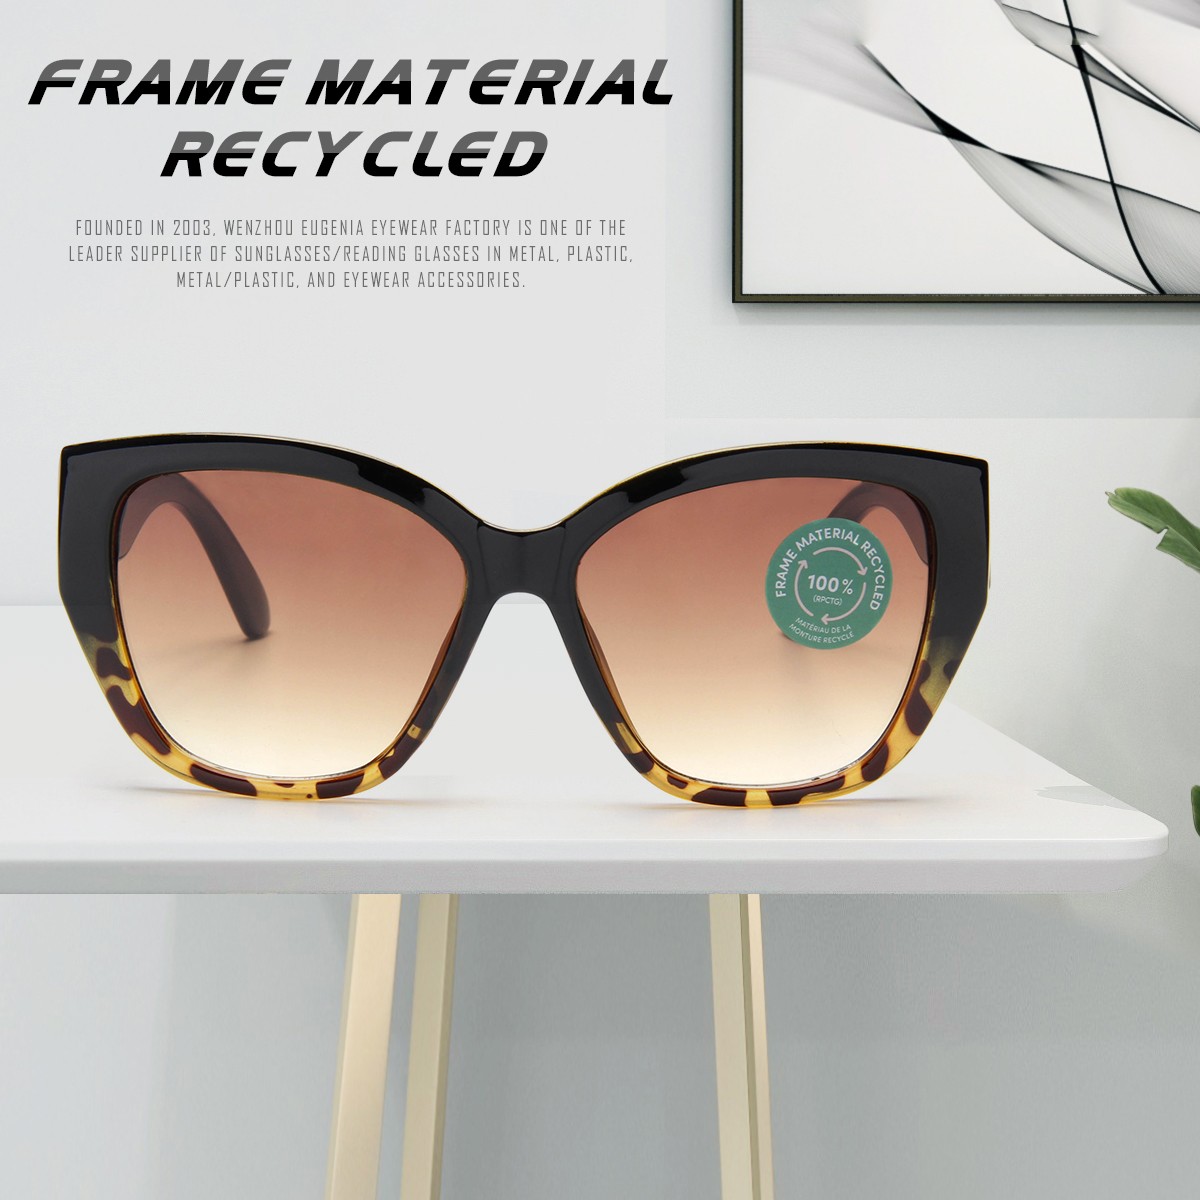 Eugenia eco-friendly recycled sunglasses marketing for recycle-1